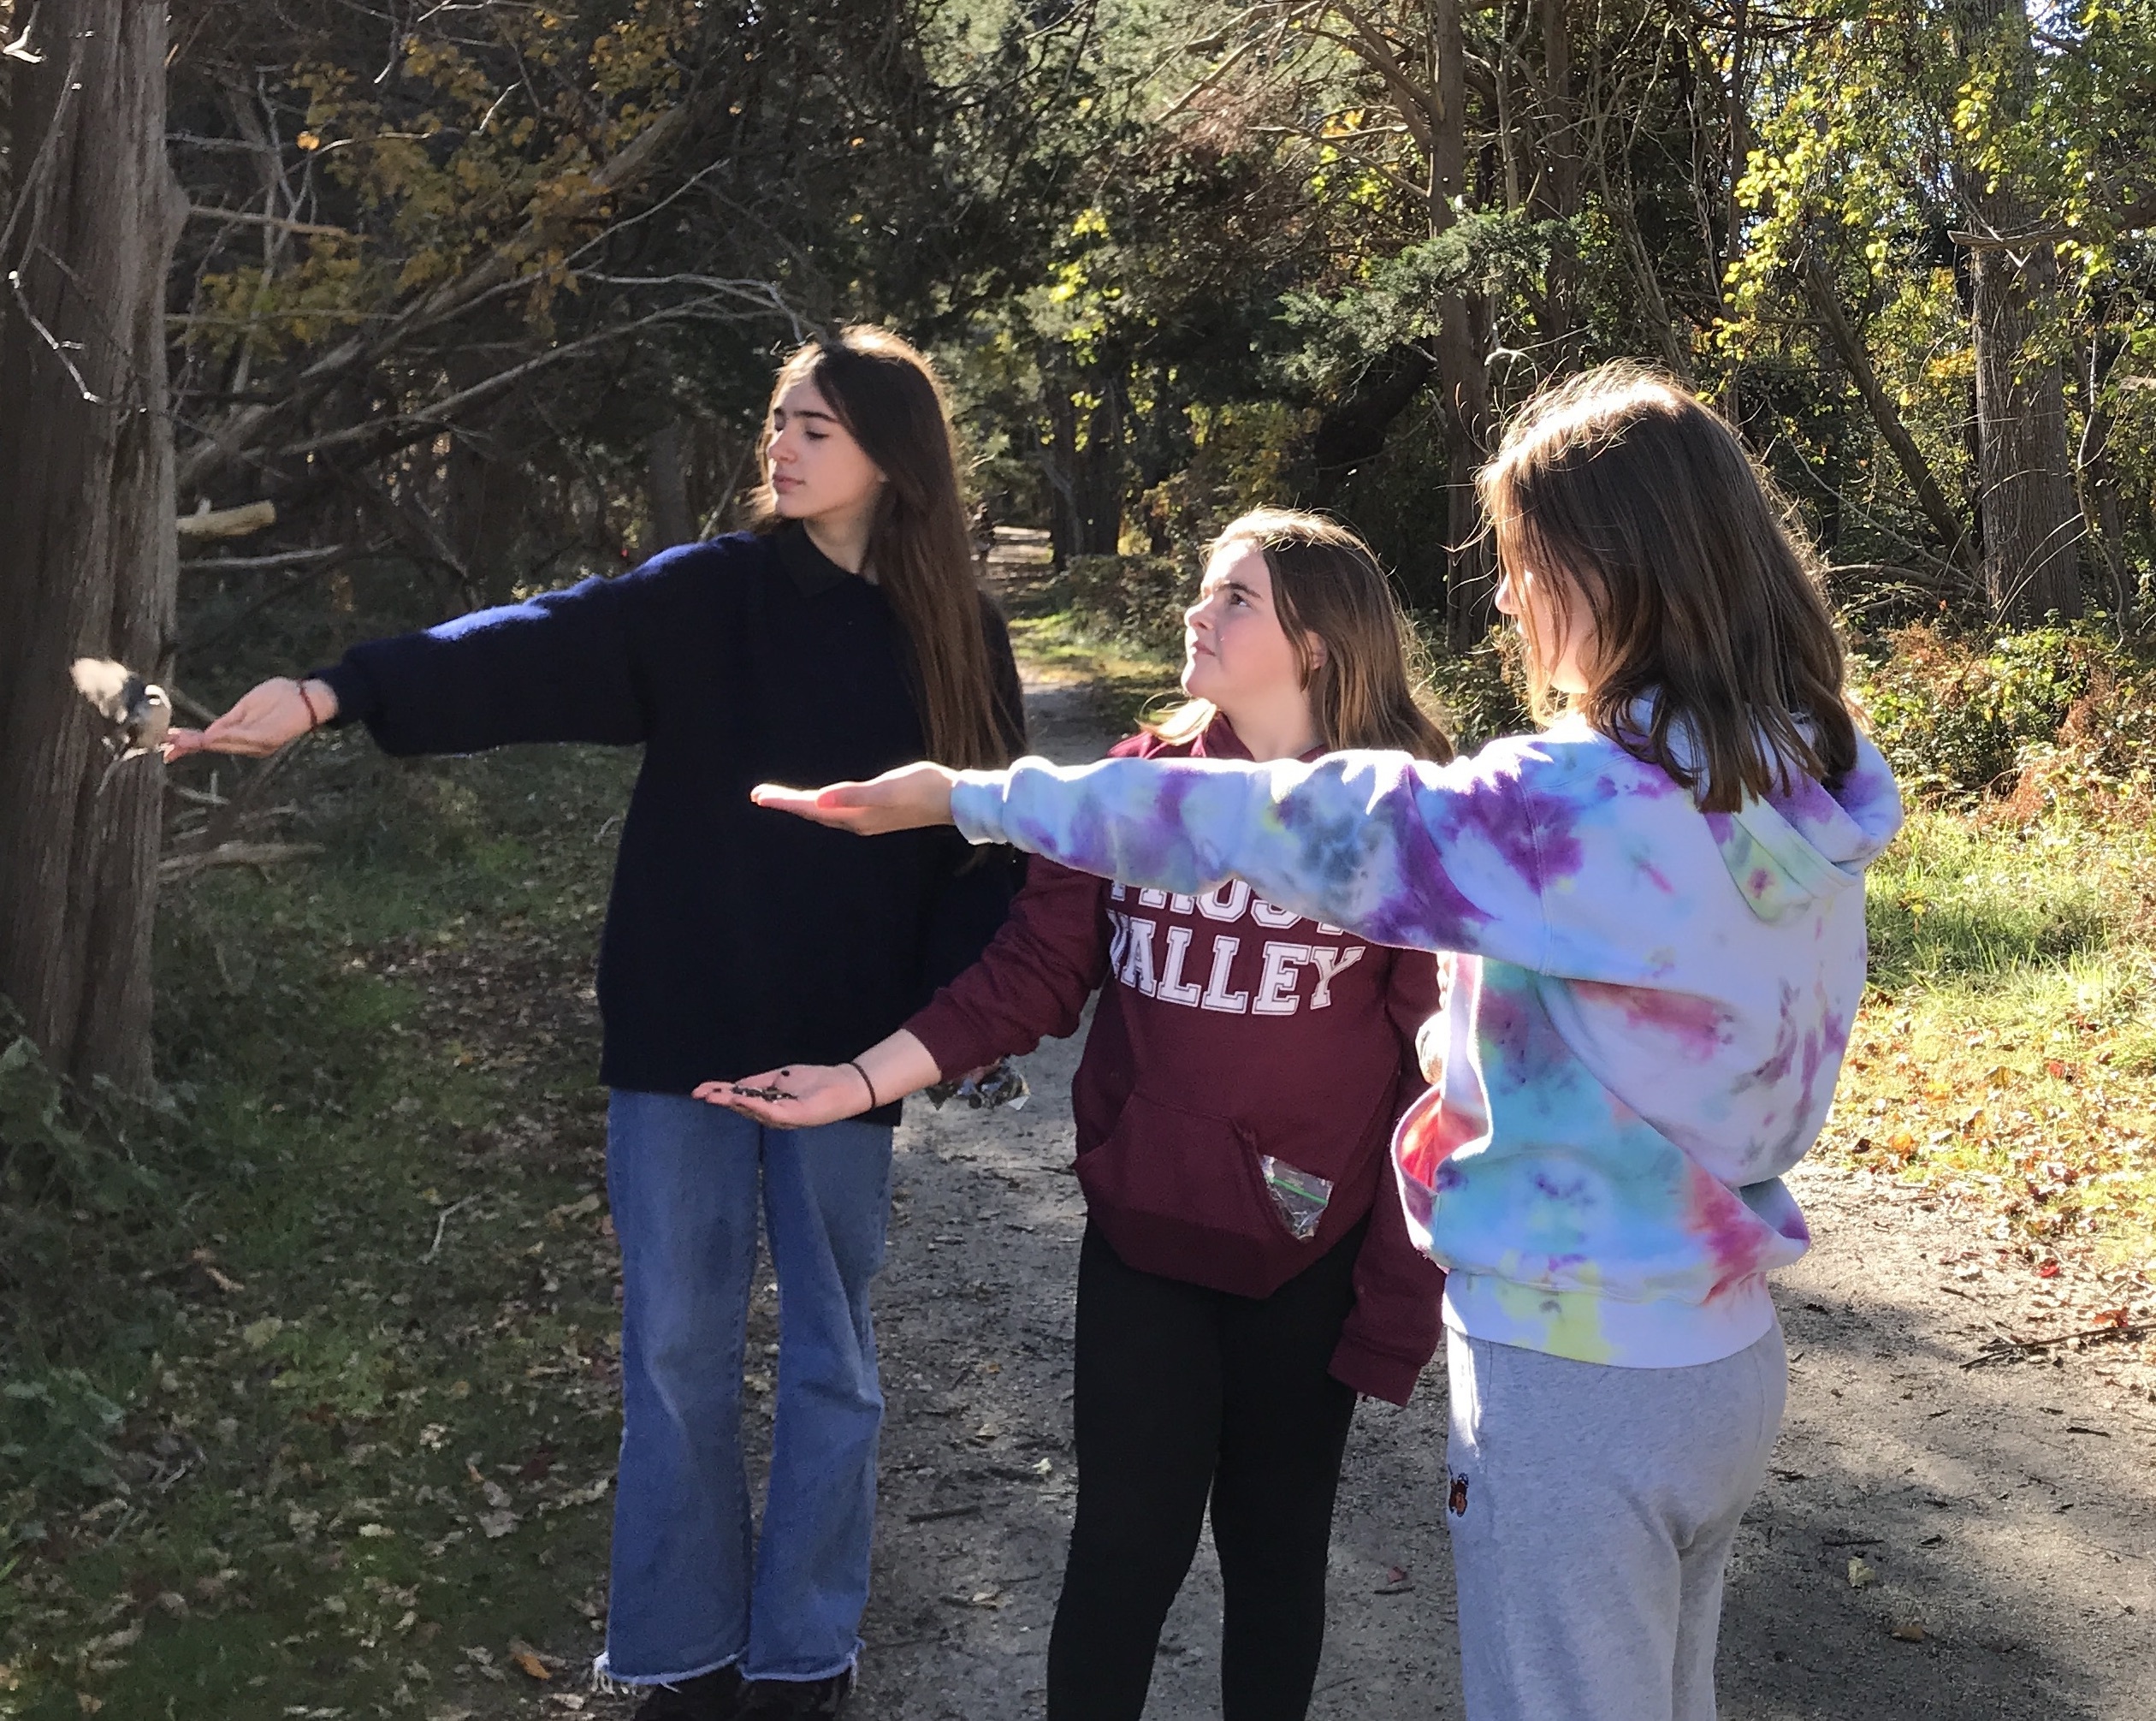 Bridgehampton School sixth-graders and members of the Outdoor Club, Sabina Piecyk, Rylee Fitzgerald and Kate Vinski on a recent outing.